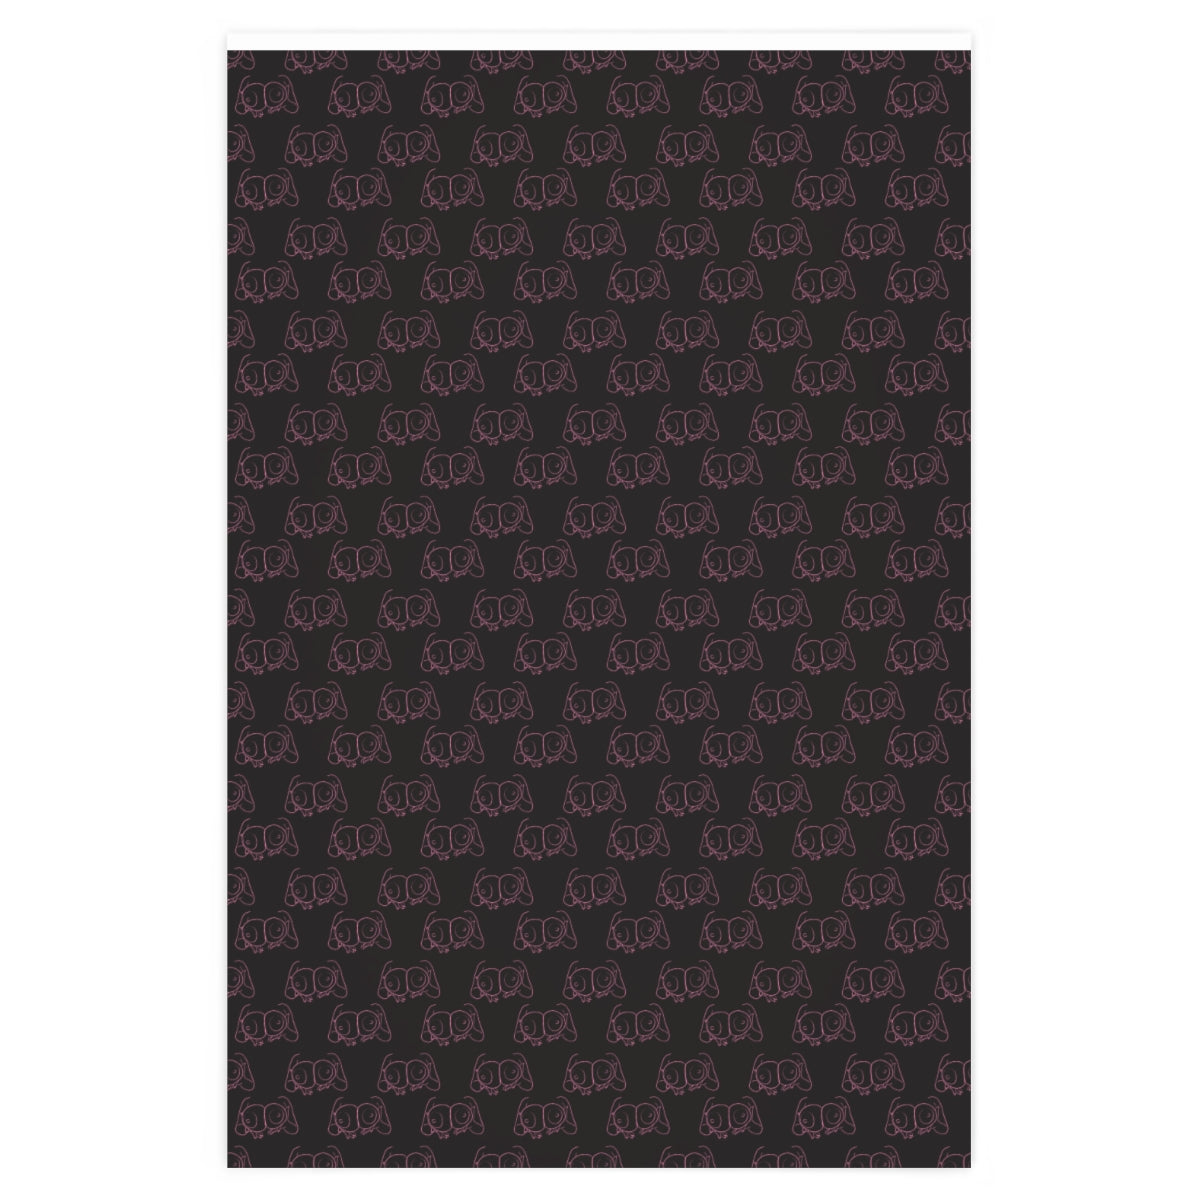 Big Boobs! Wrapping Paper - Black & Pink – Playful Papers